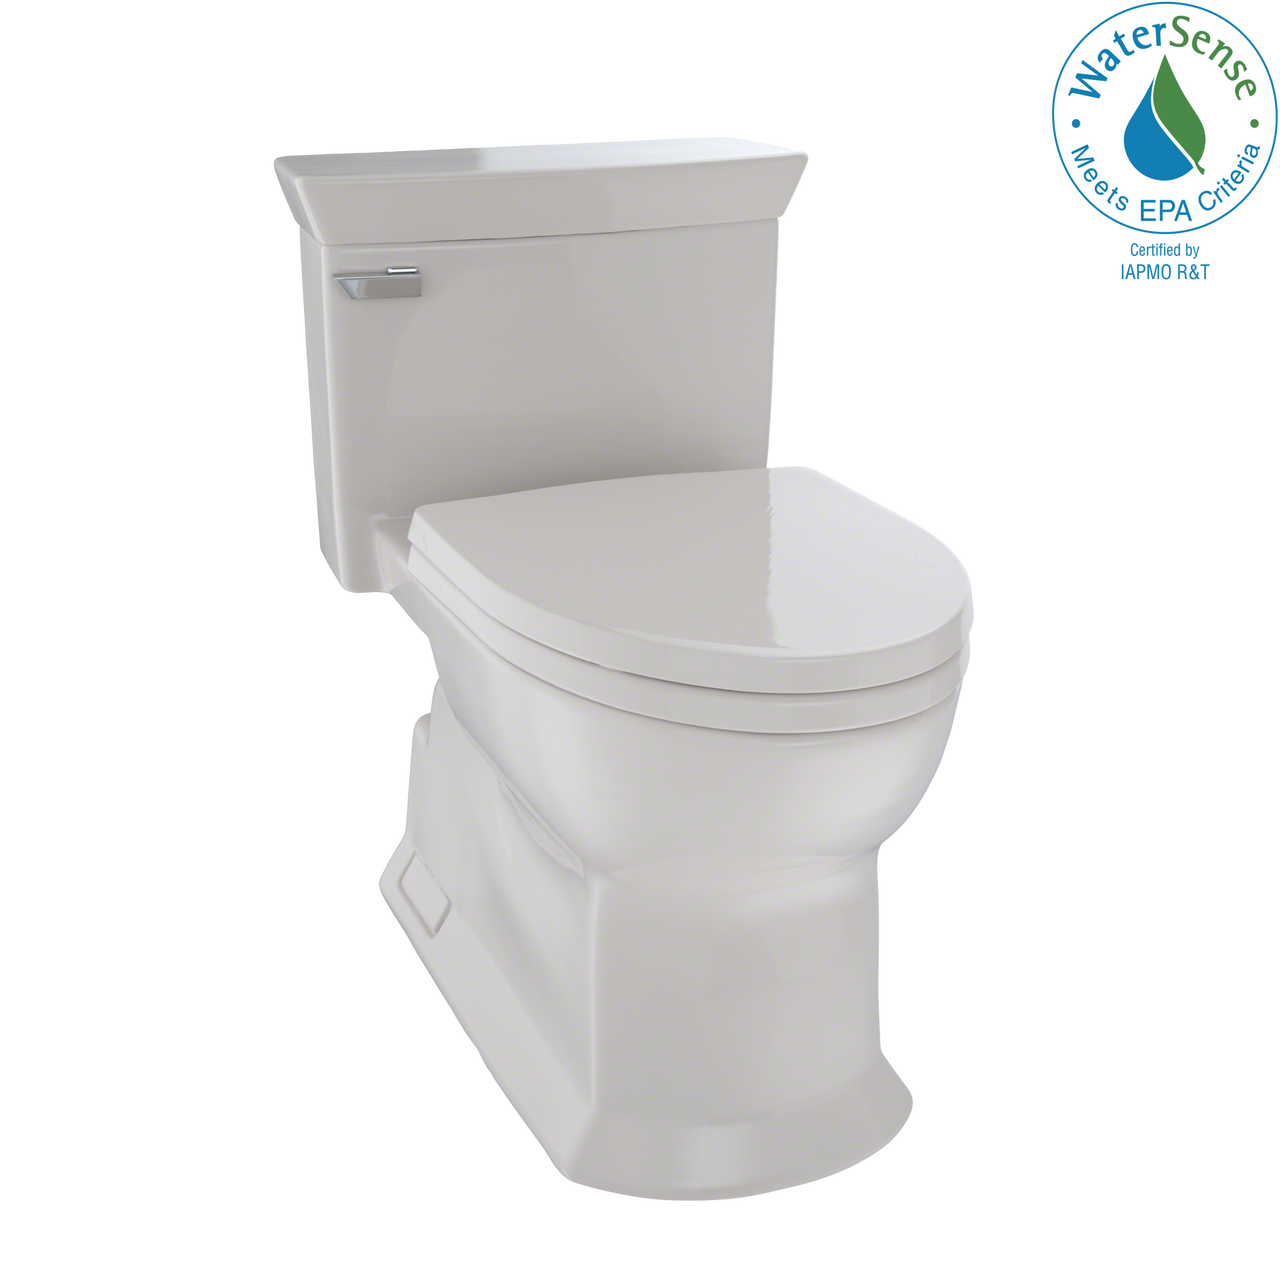 TOTO Eco Soir√©e One Piece Elongated 1.28 GPF Universal Height Skirted Toilet with CeFiONtect,  - MS964214CEFG#12 - BNGBath